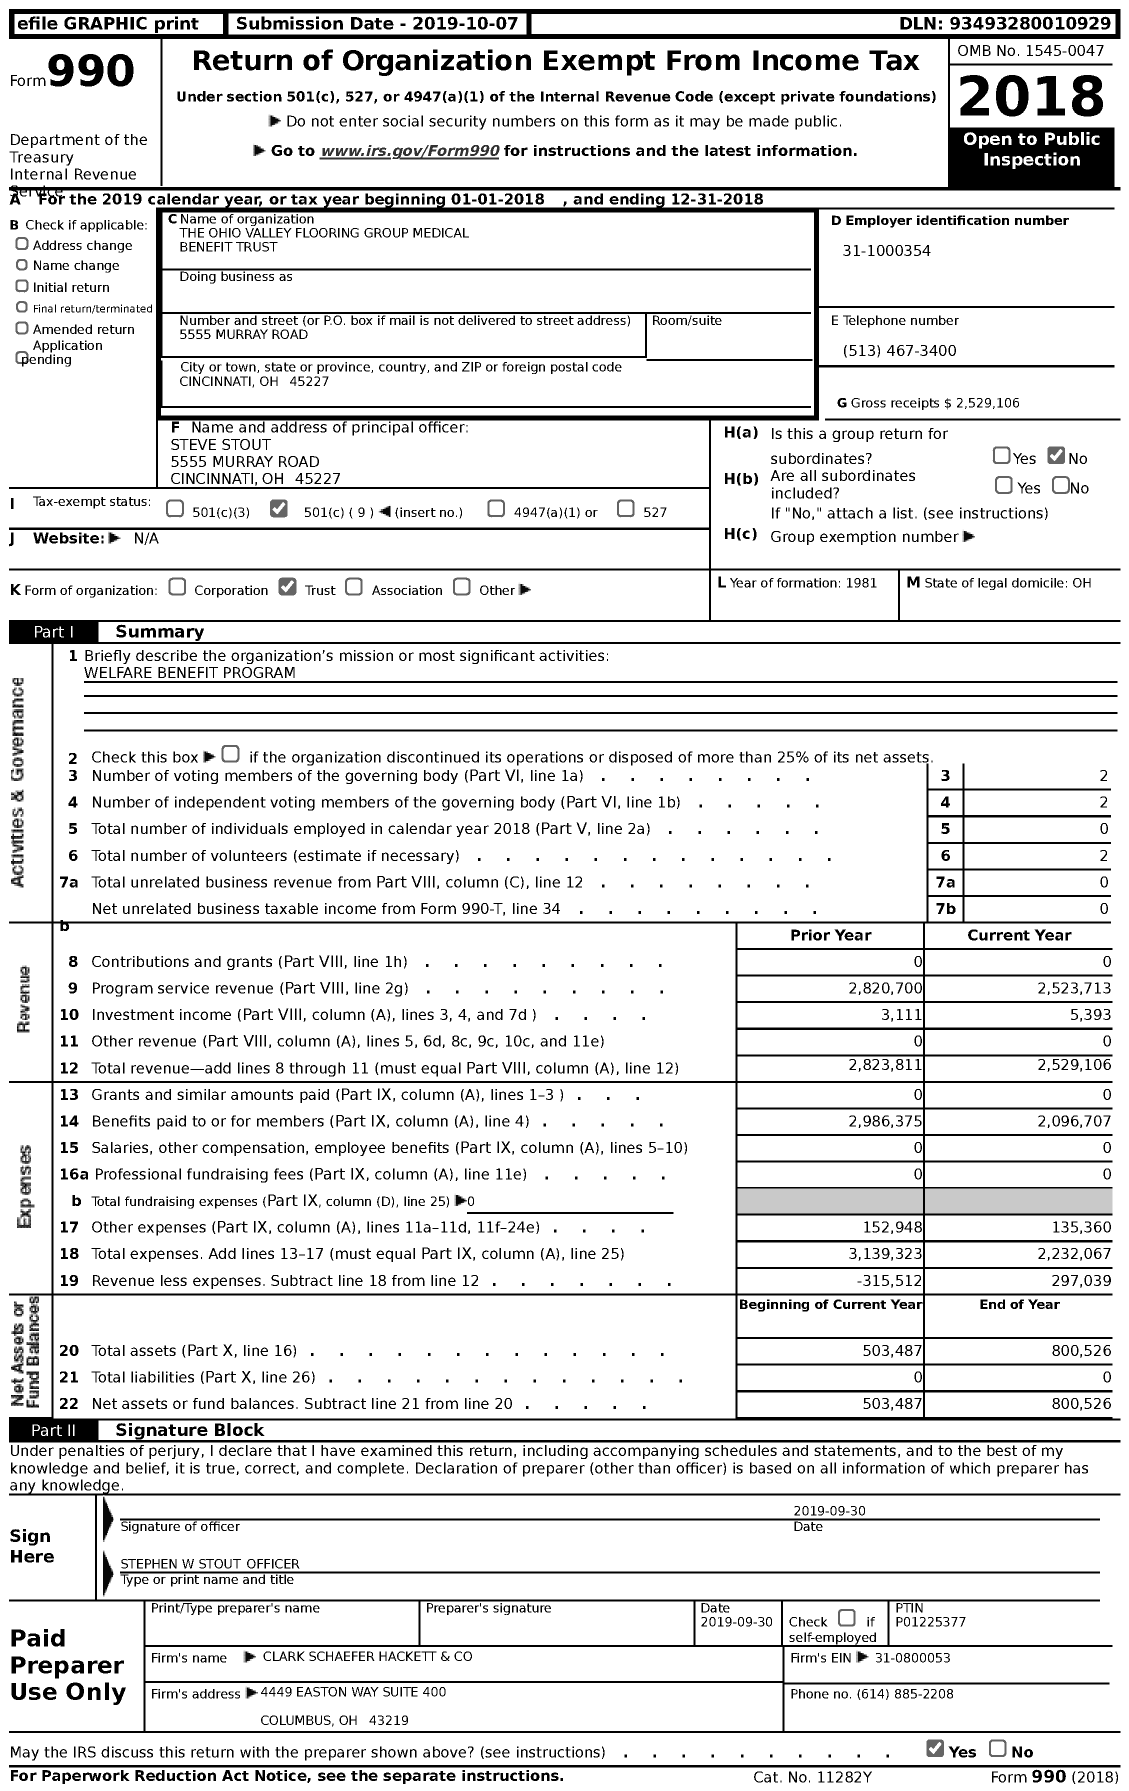 Image of first page of 2018 Form 990 for The Ohio Valley Flooring Group Medical Benefit Trust